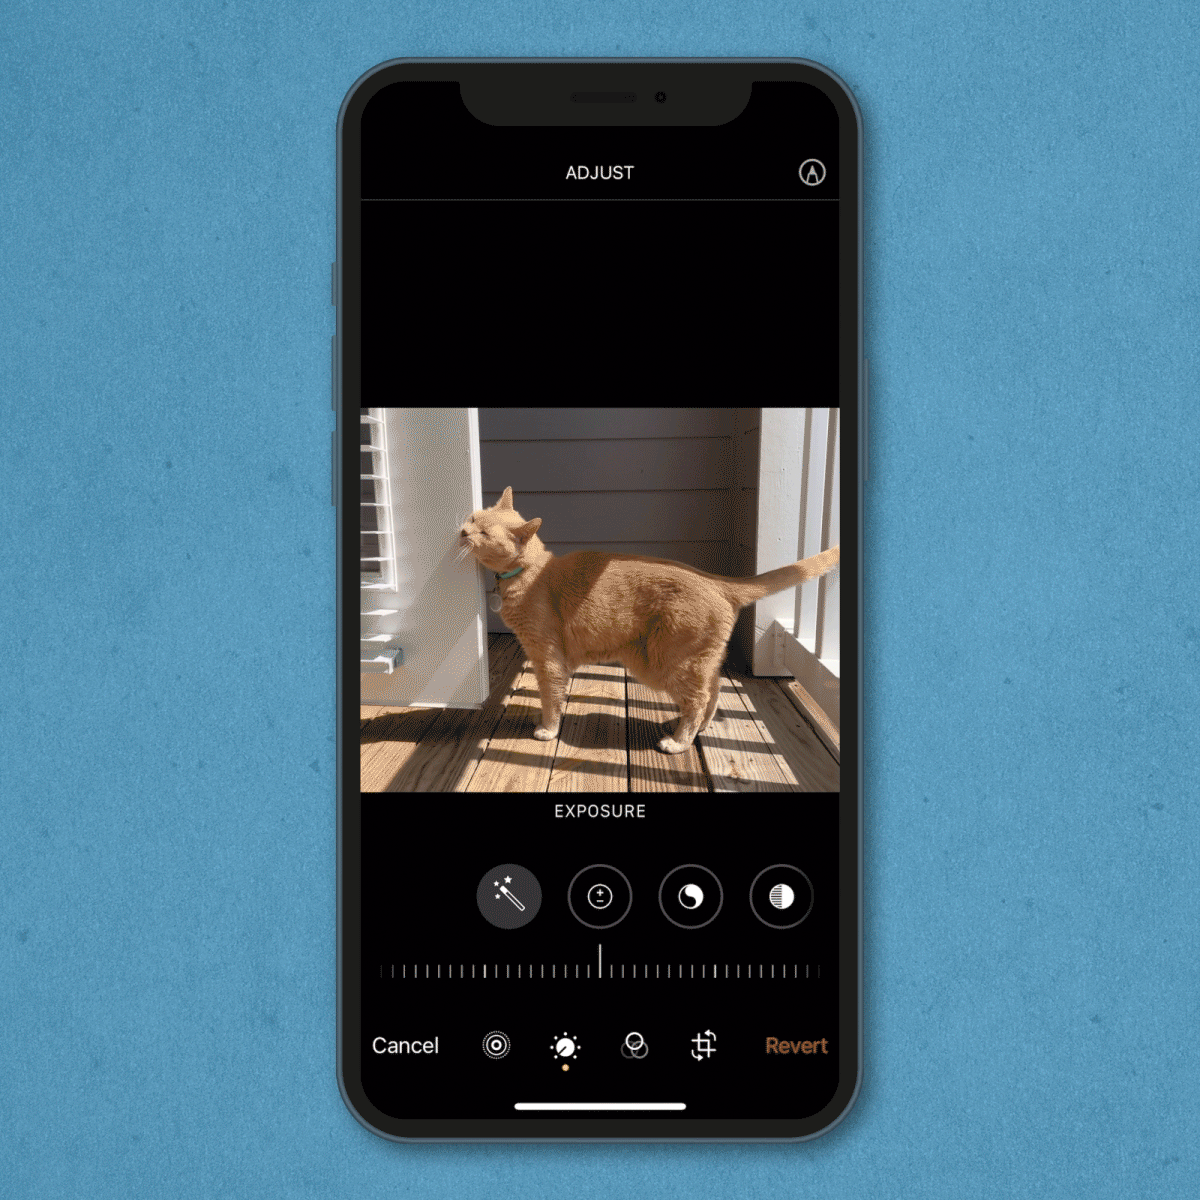 gif showing how to edit a photo's exposure on an iPhone